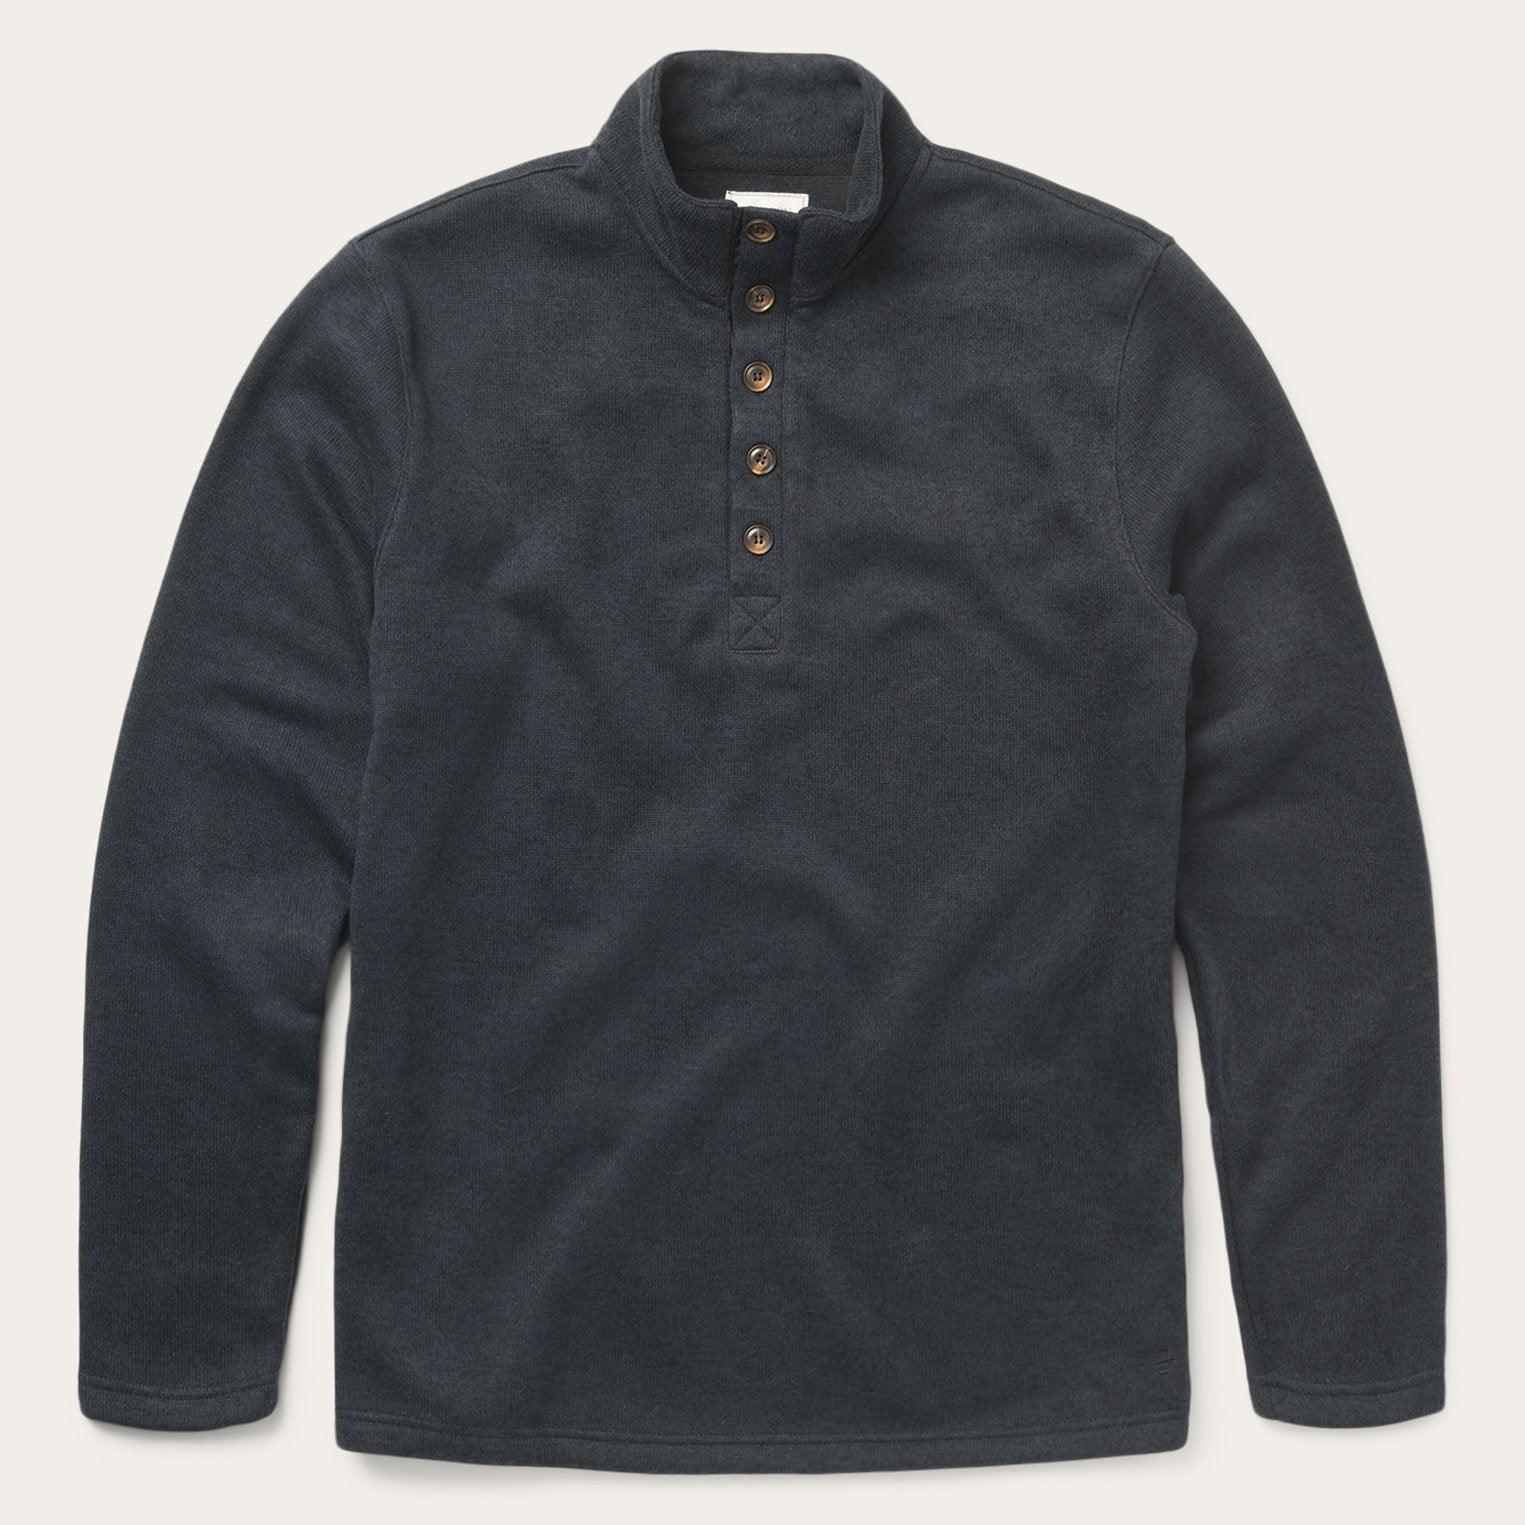 Stetson Gray Pullover Knit Sweater - Flyclothing LLC